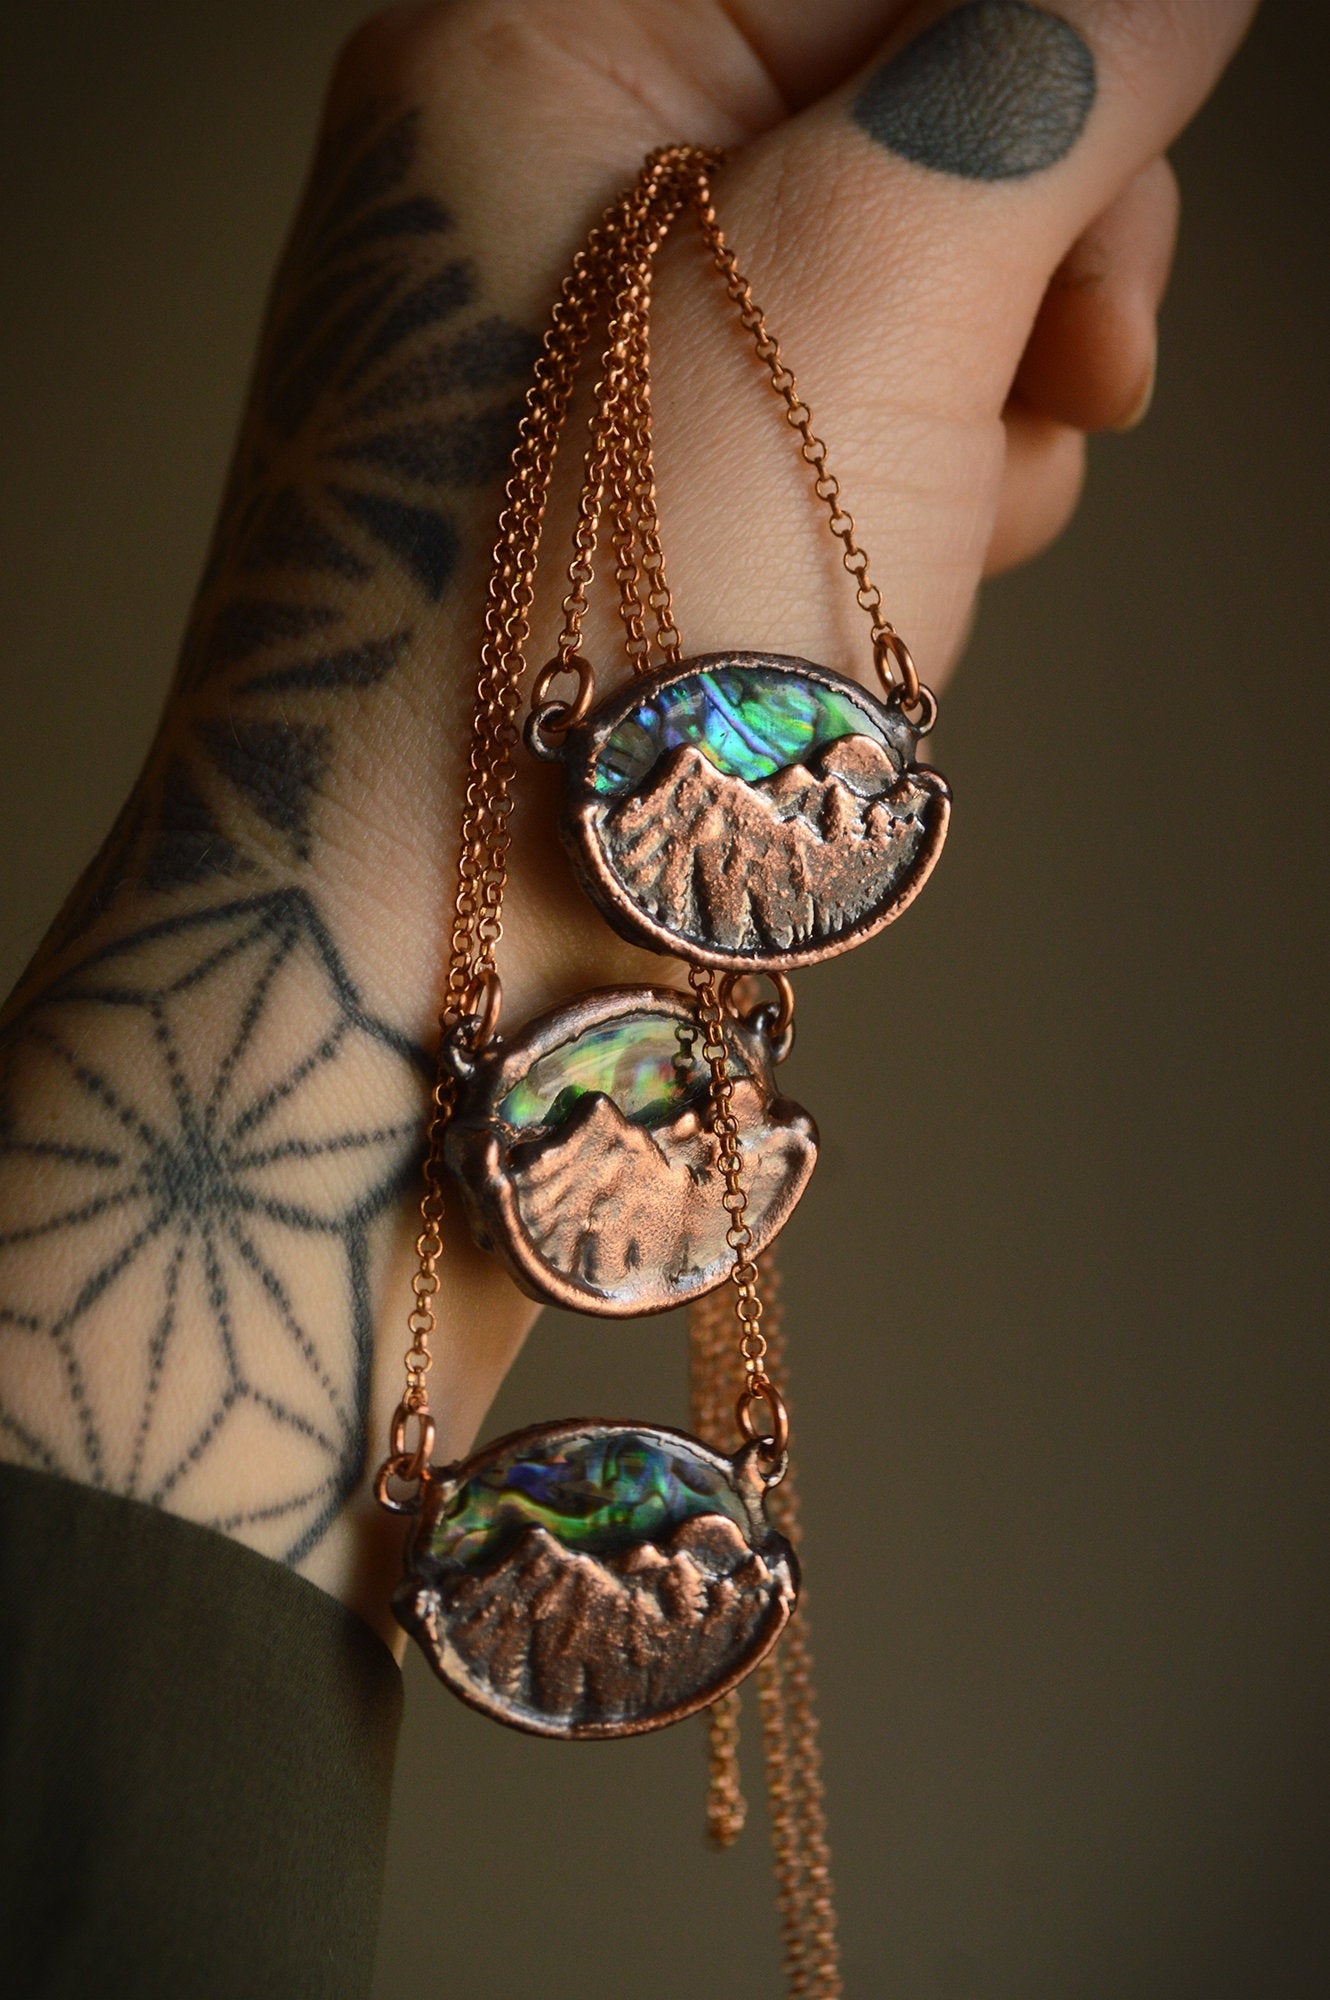 Northern lights copper necklace. Dainty miniature dreamy landscape. Rustic abalone healing jewellery